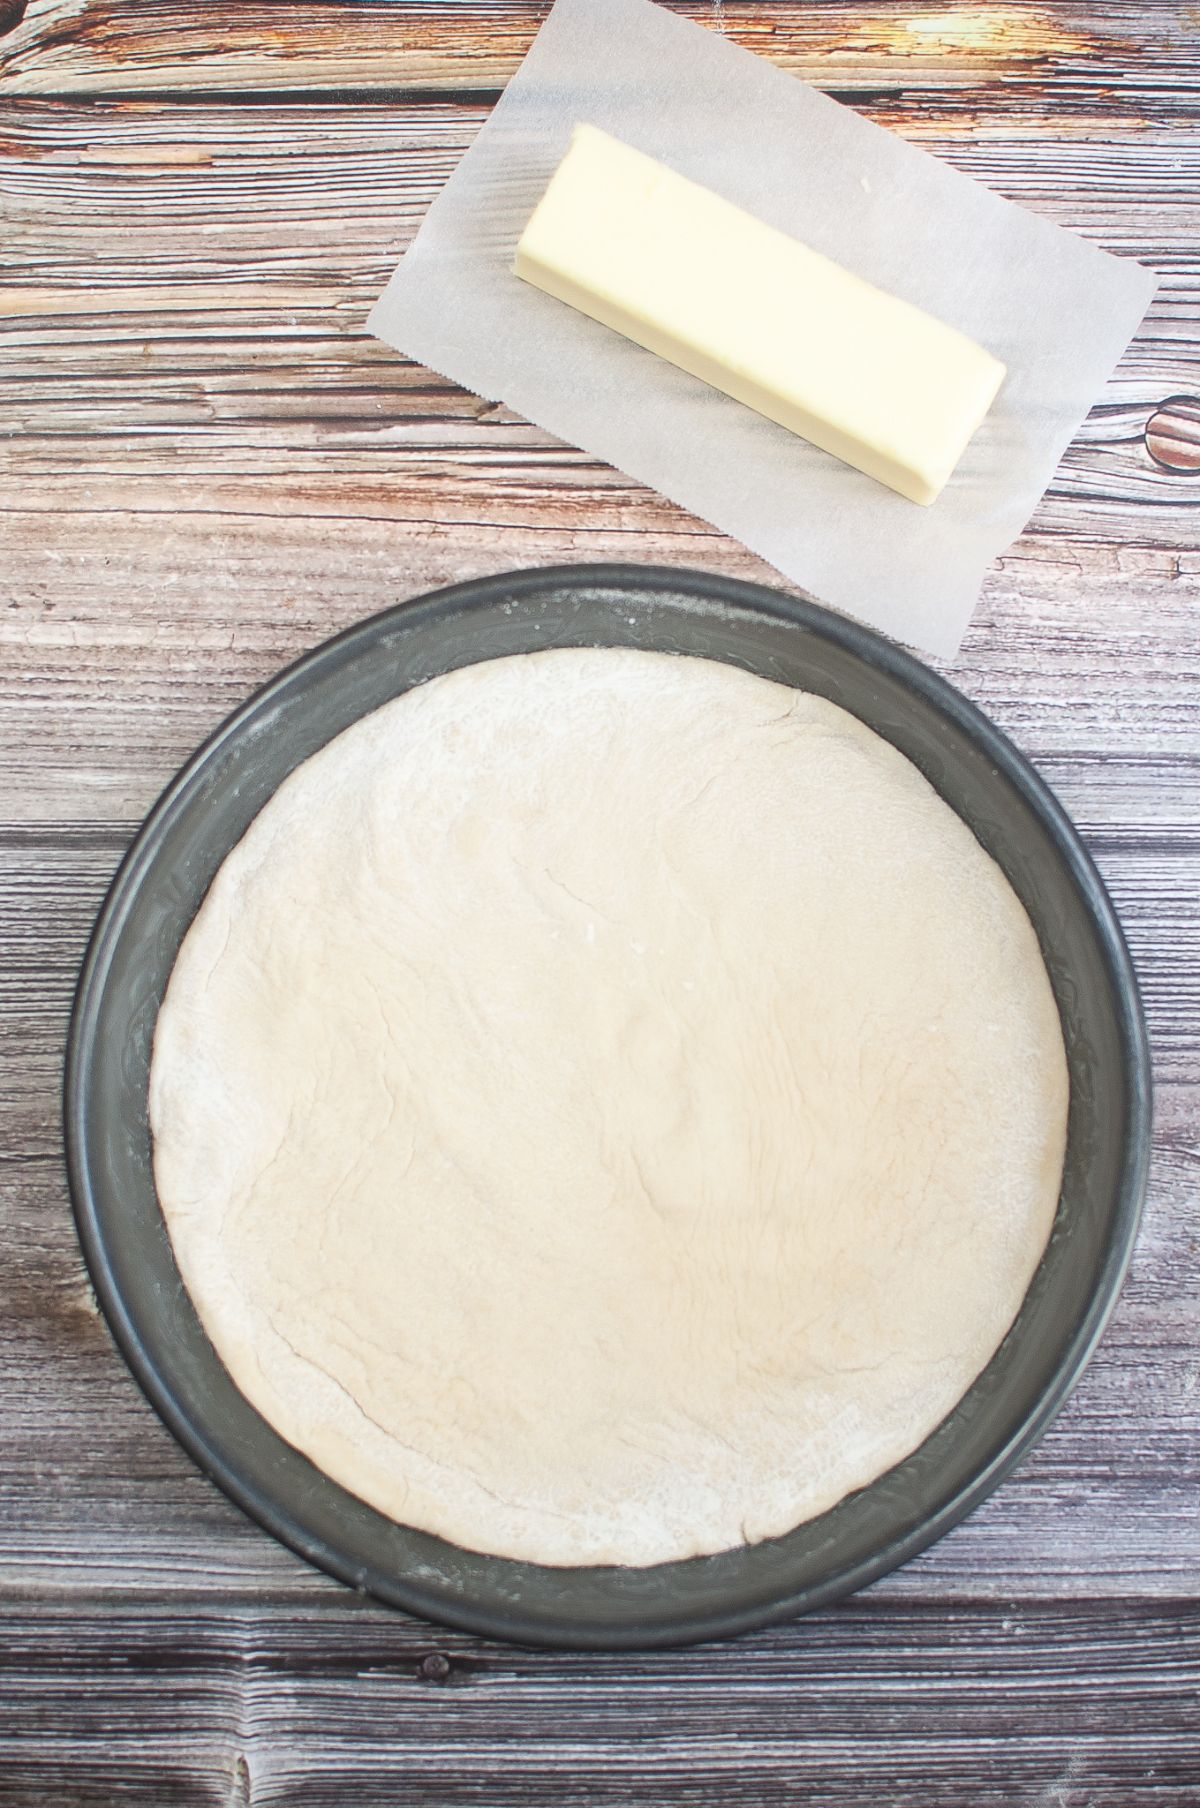 Rolled out dough on a pan with butter on the side.